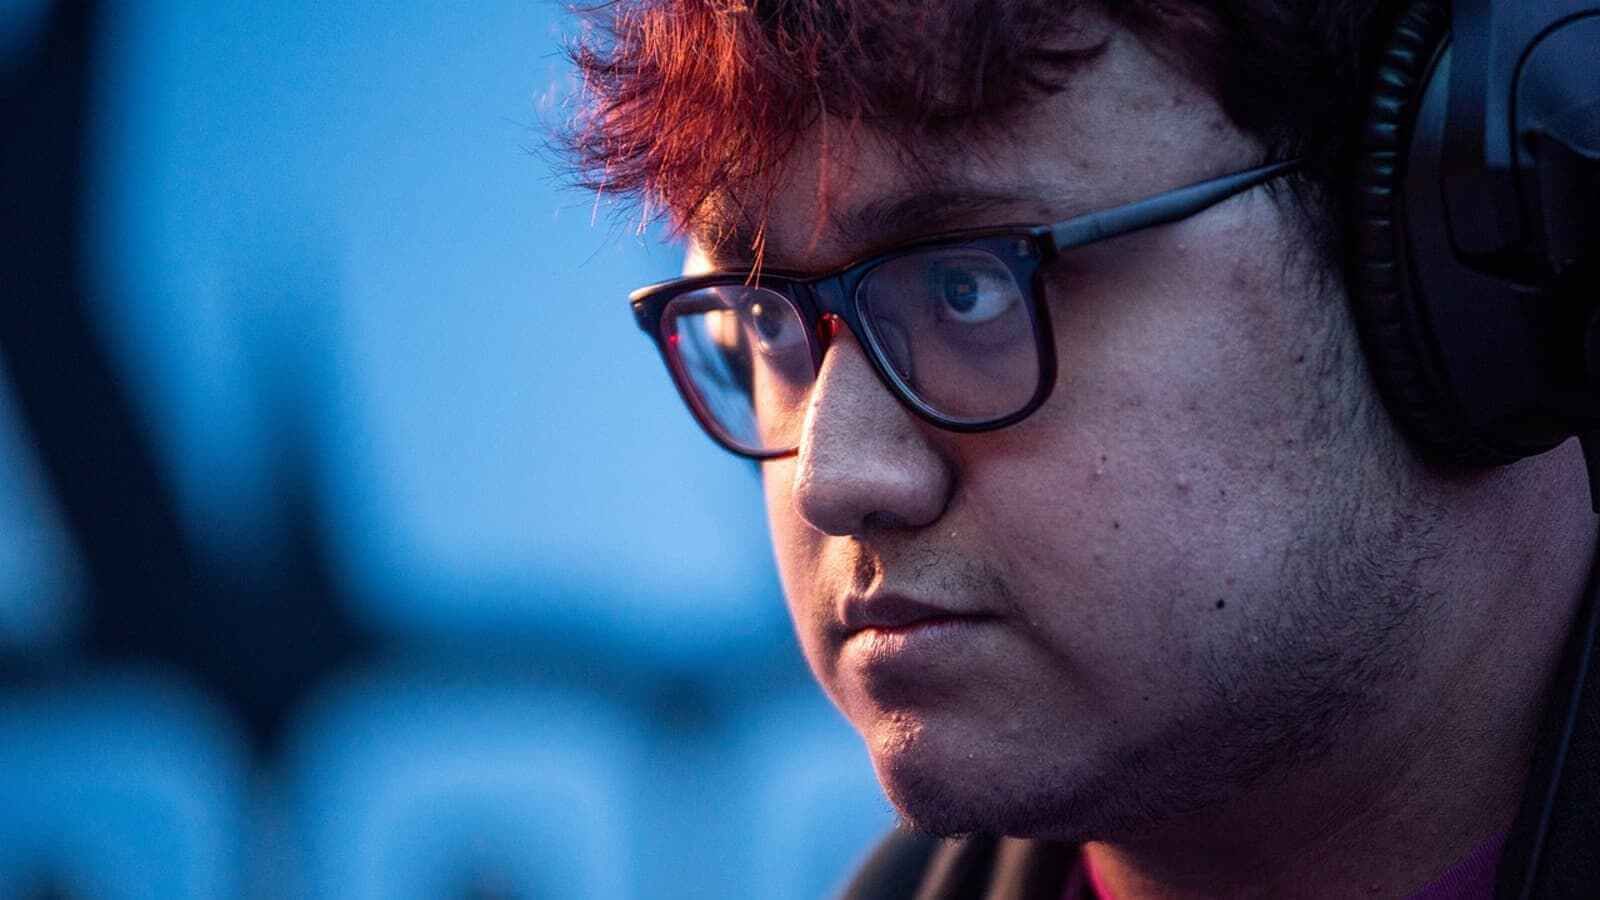 MkLeo reported about health problems that will affect his career